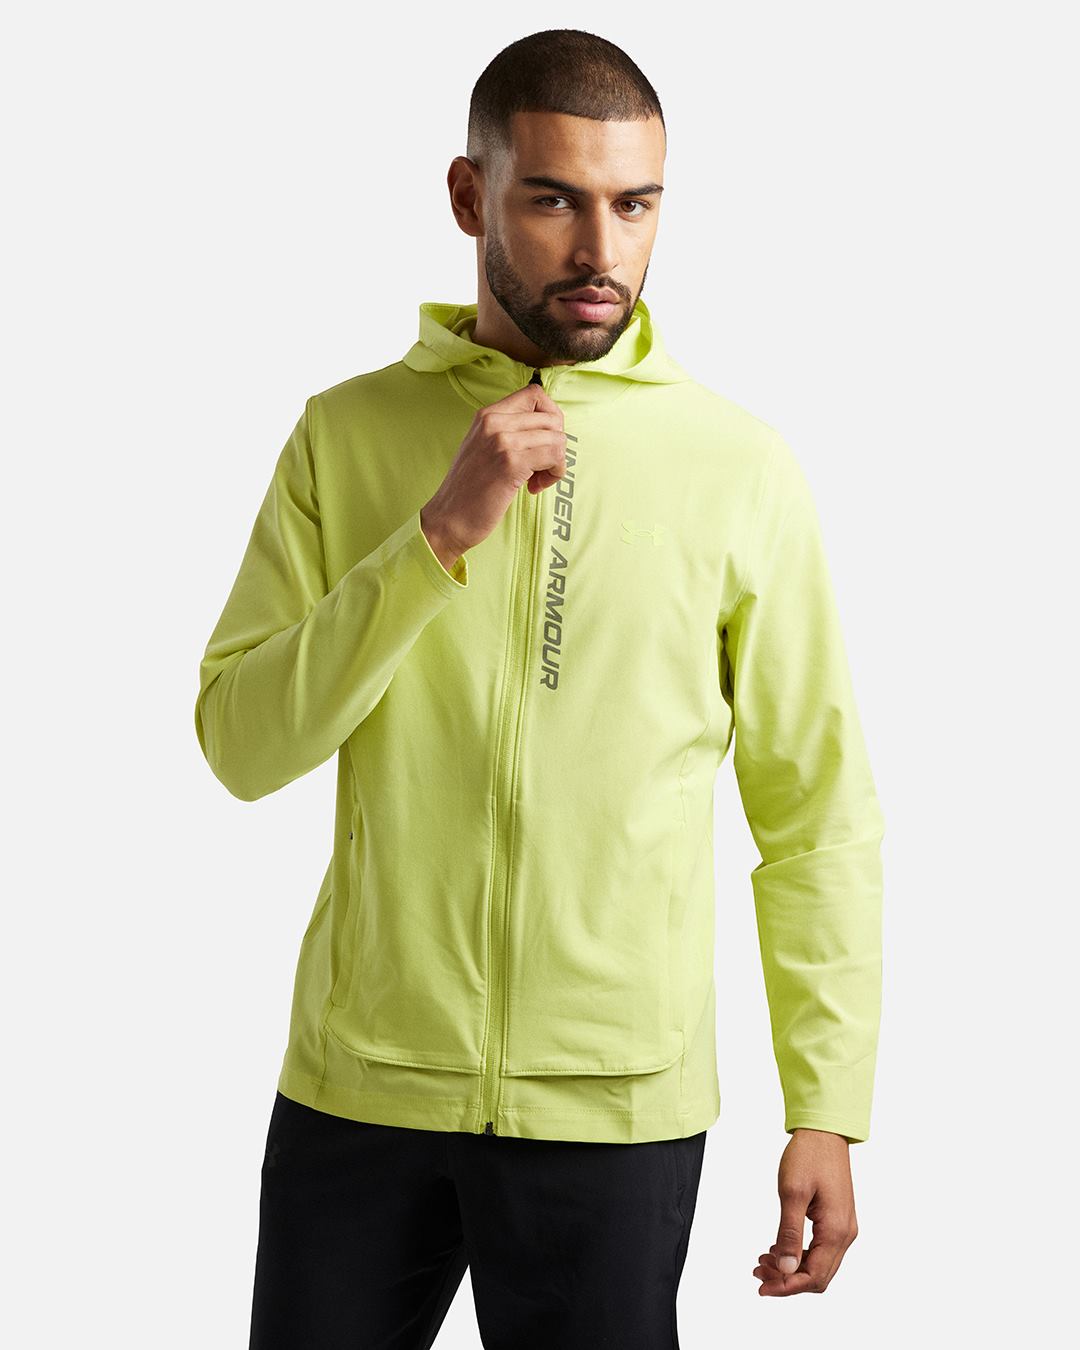 Under Armor Outrun The Storm Jacket - Yellow